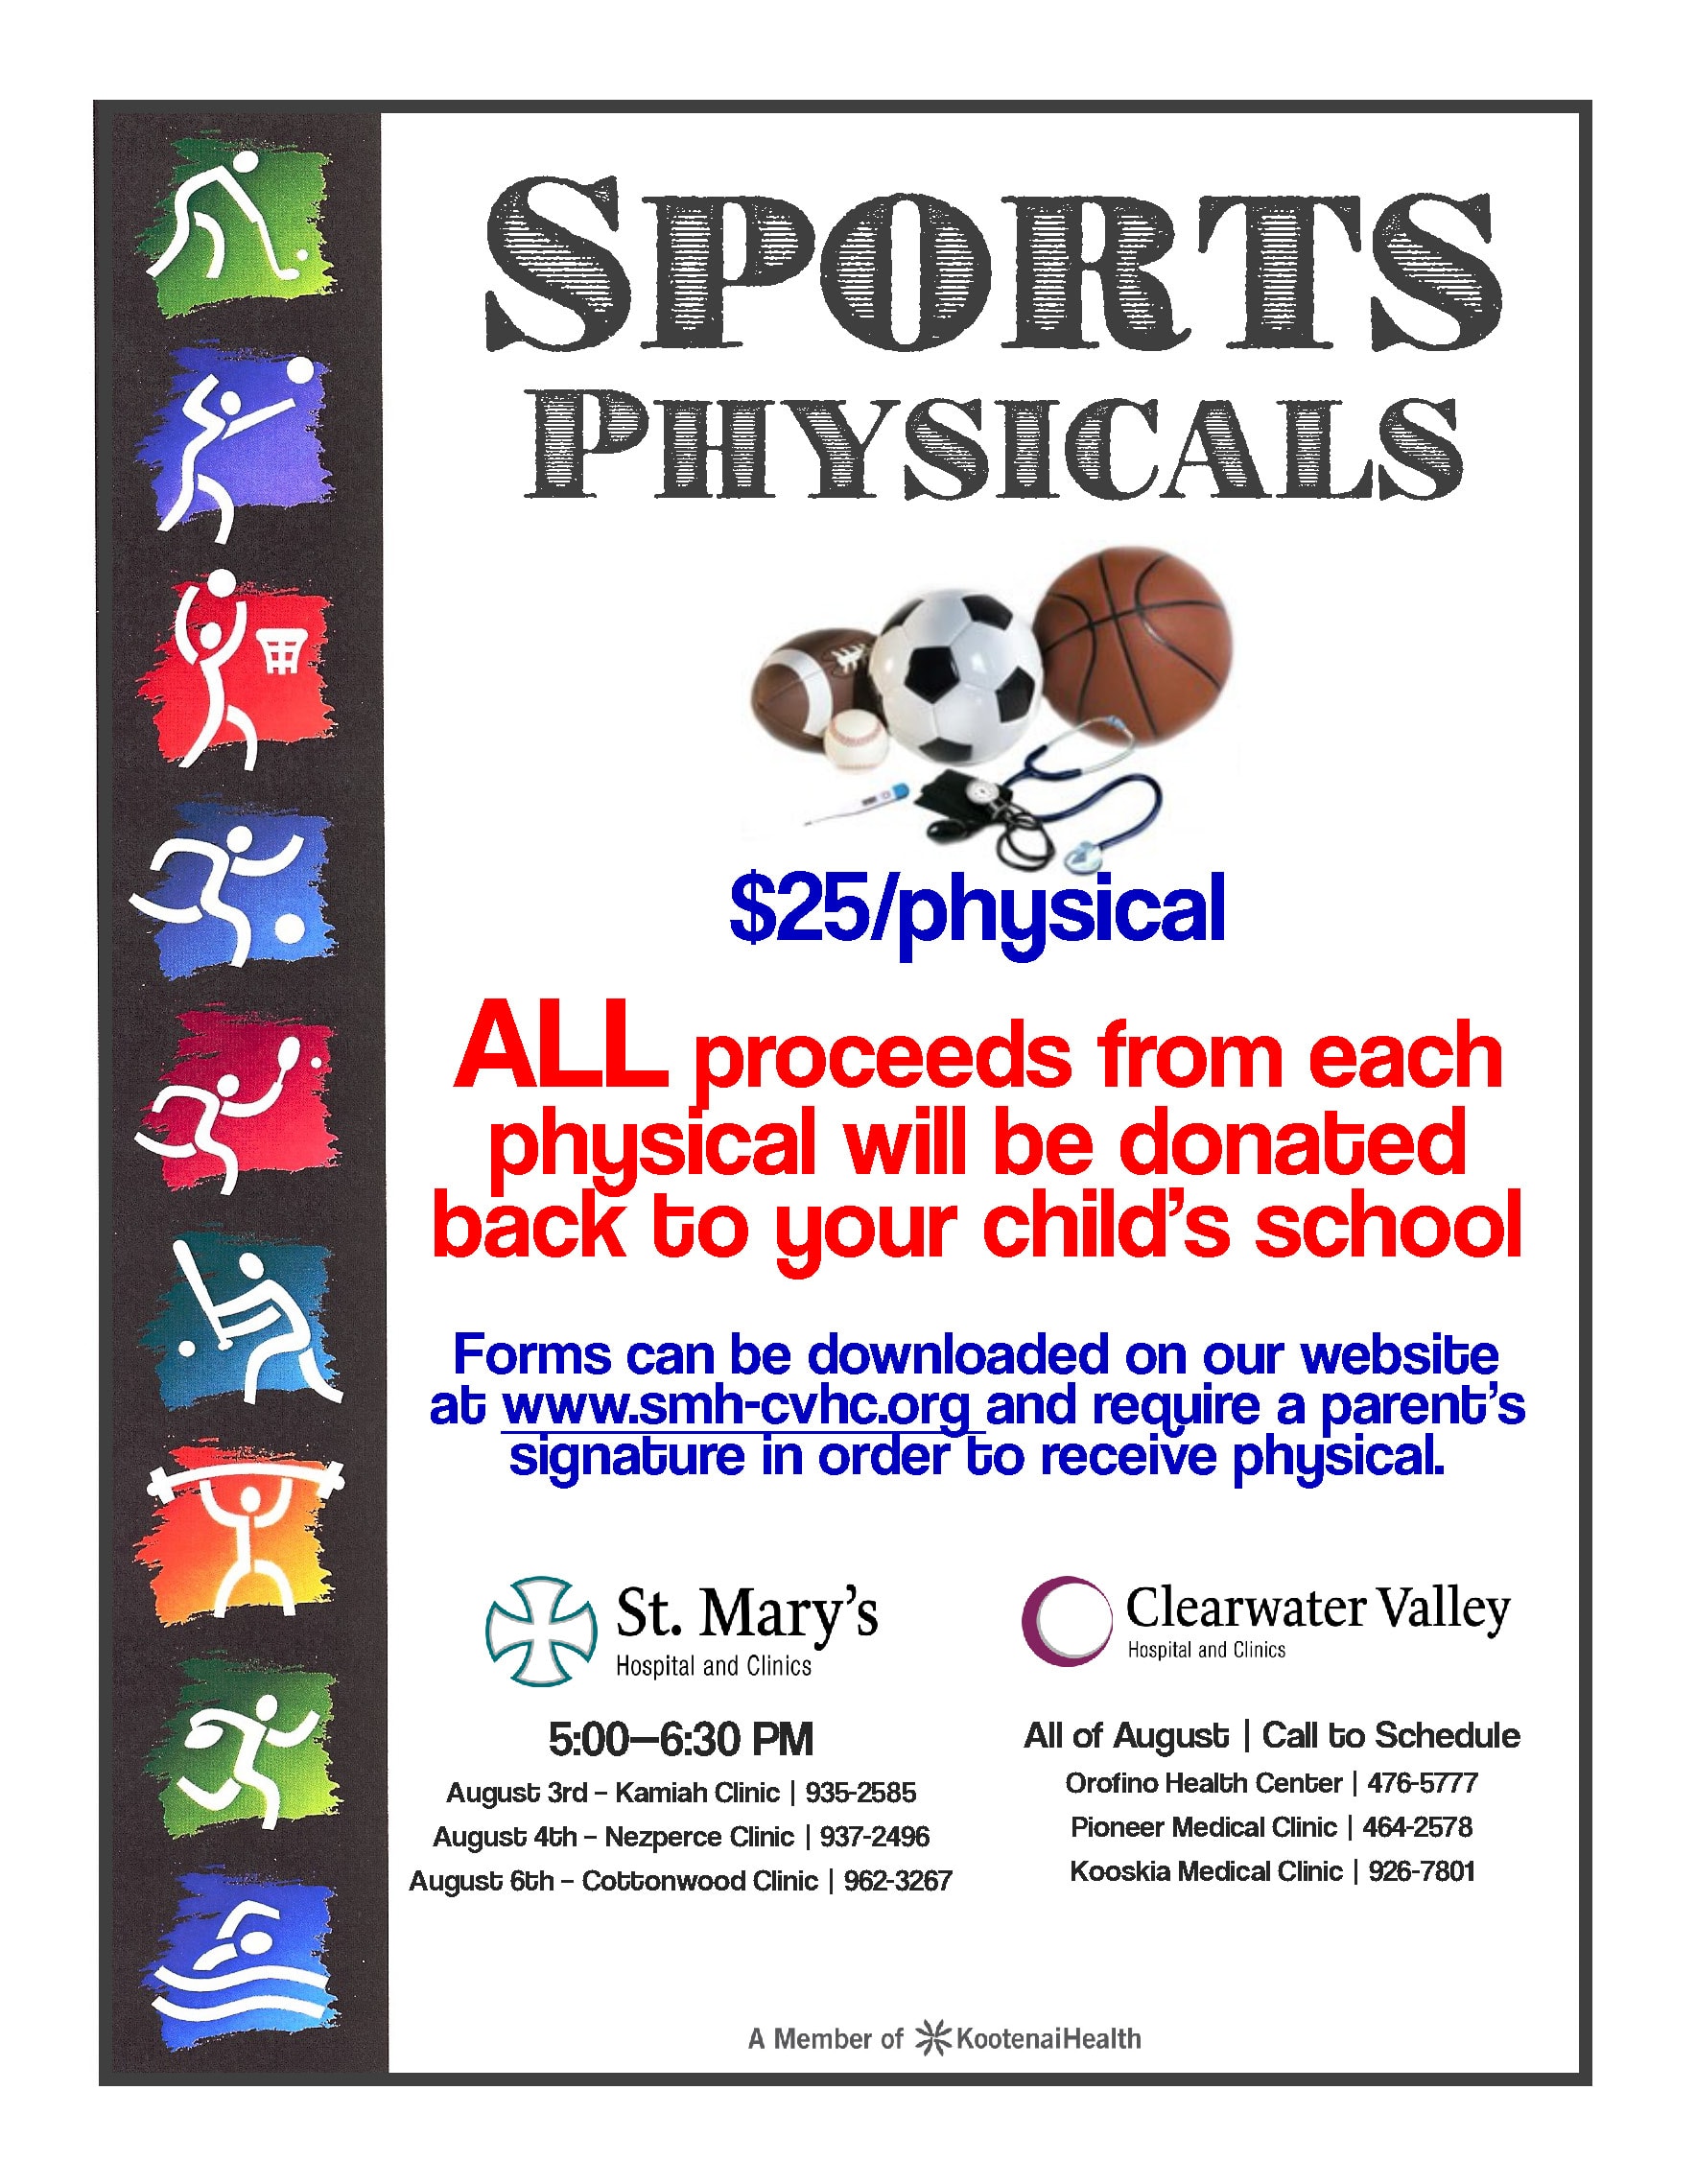 chiropractor sports physicals near me